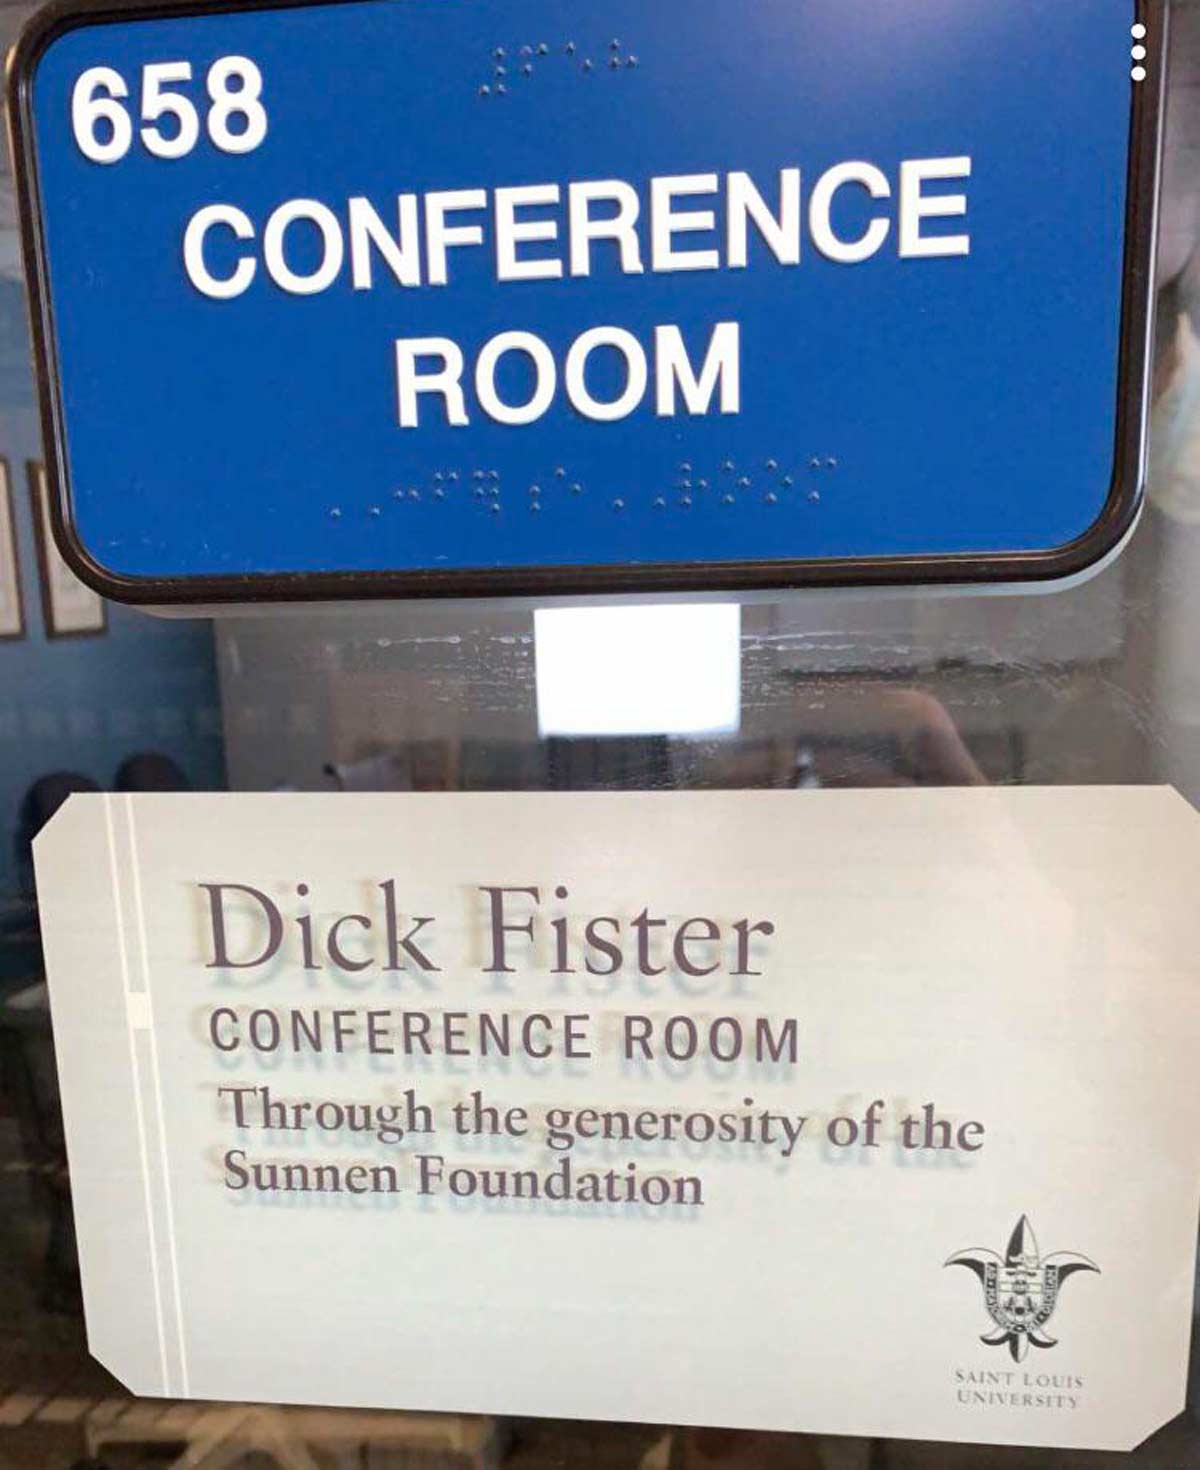 This conference room at my friend’s law school